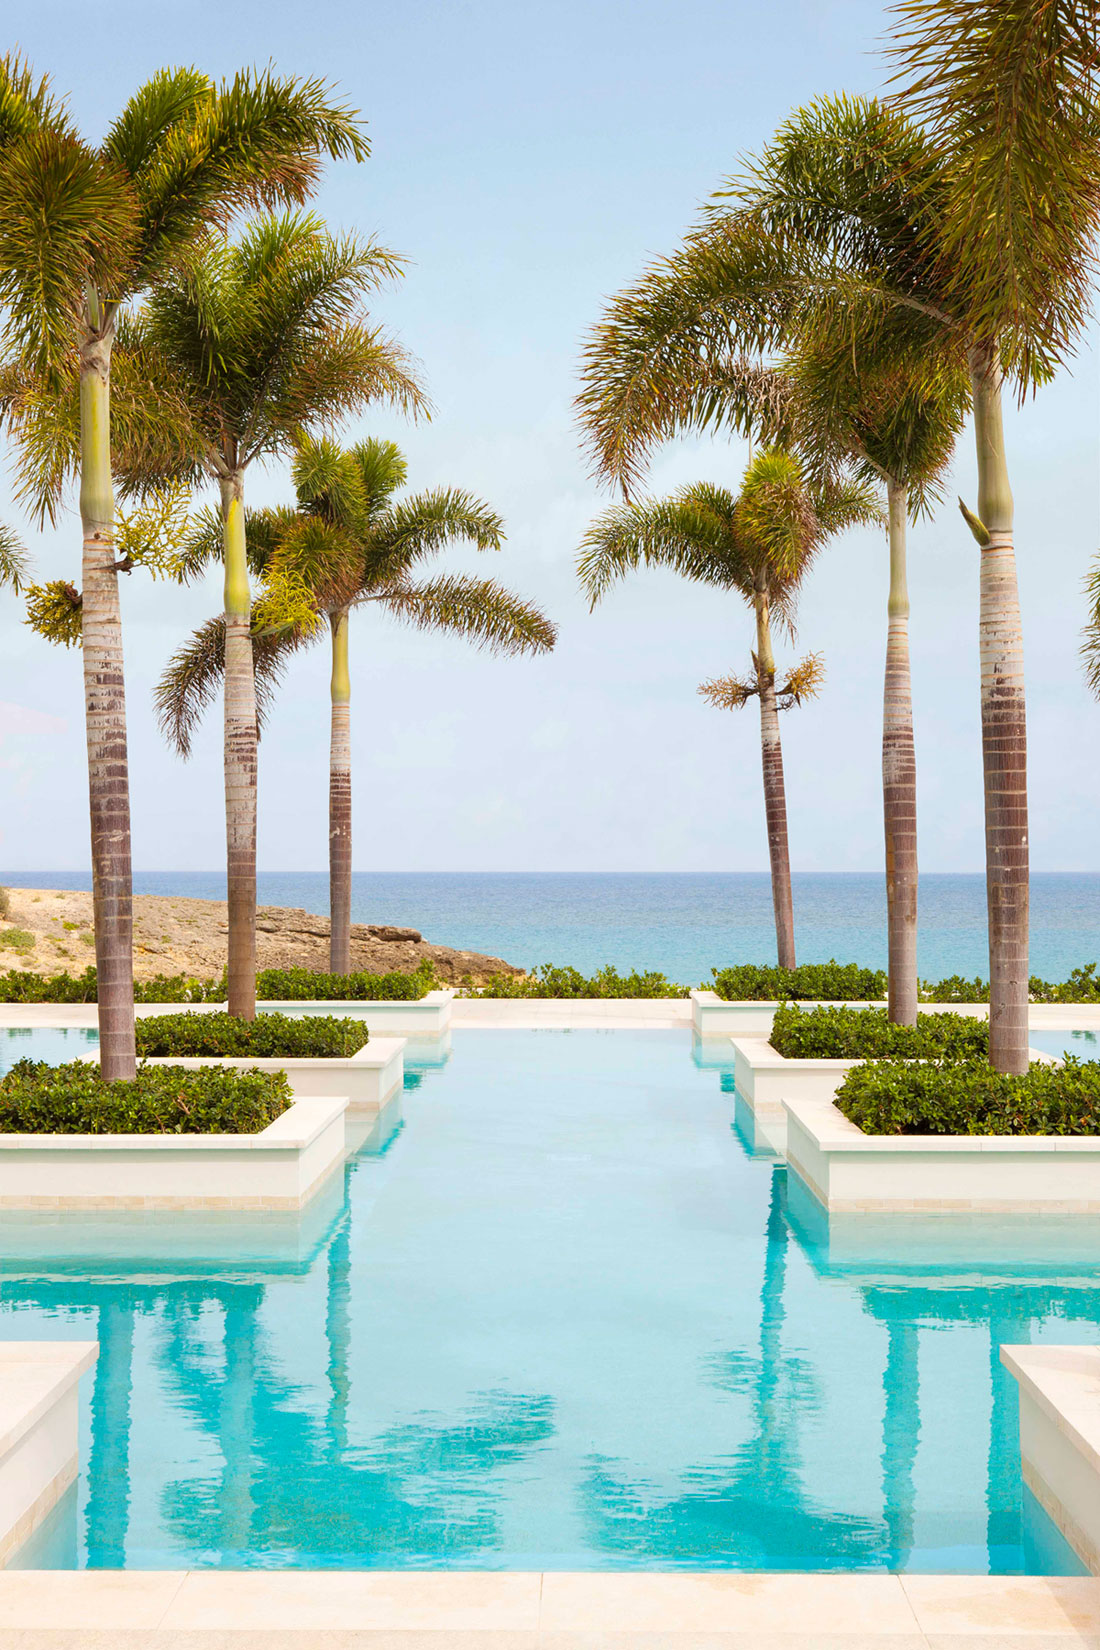 The Luxury Caribbean Resort, Viceroy Anguilla | Architecture & Design